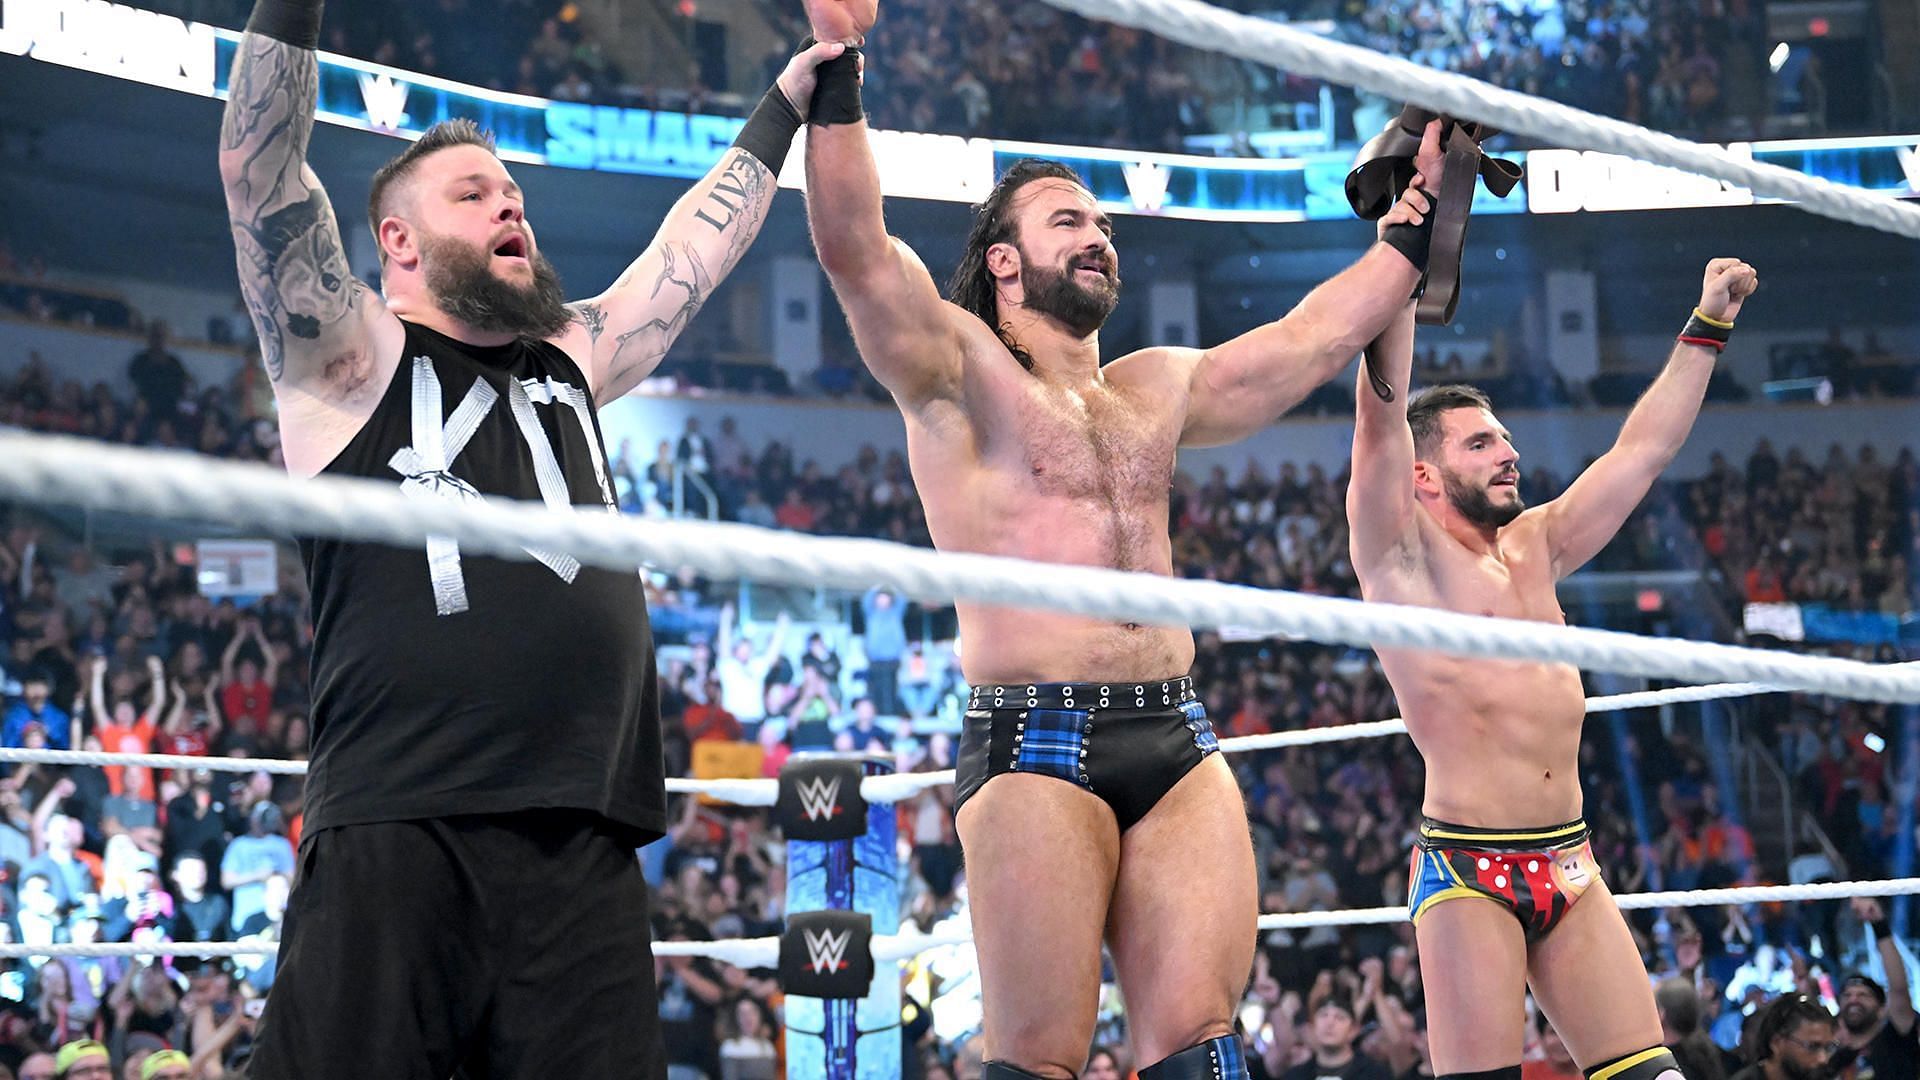 The babyfaces conquered the heels on WWE SmackDown